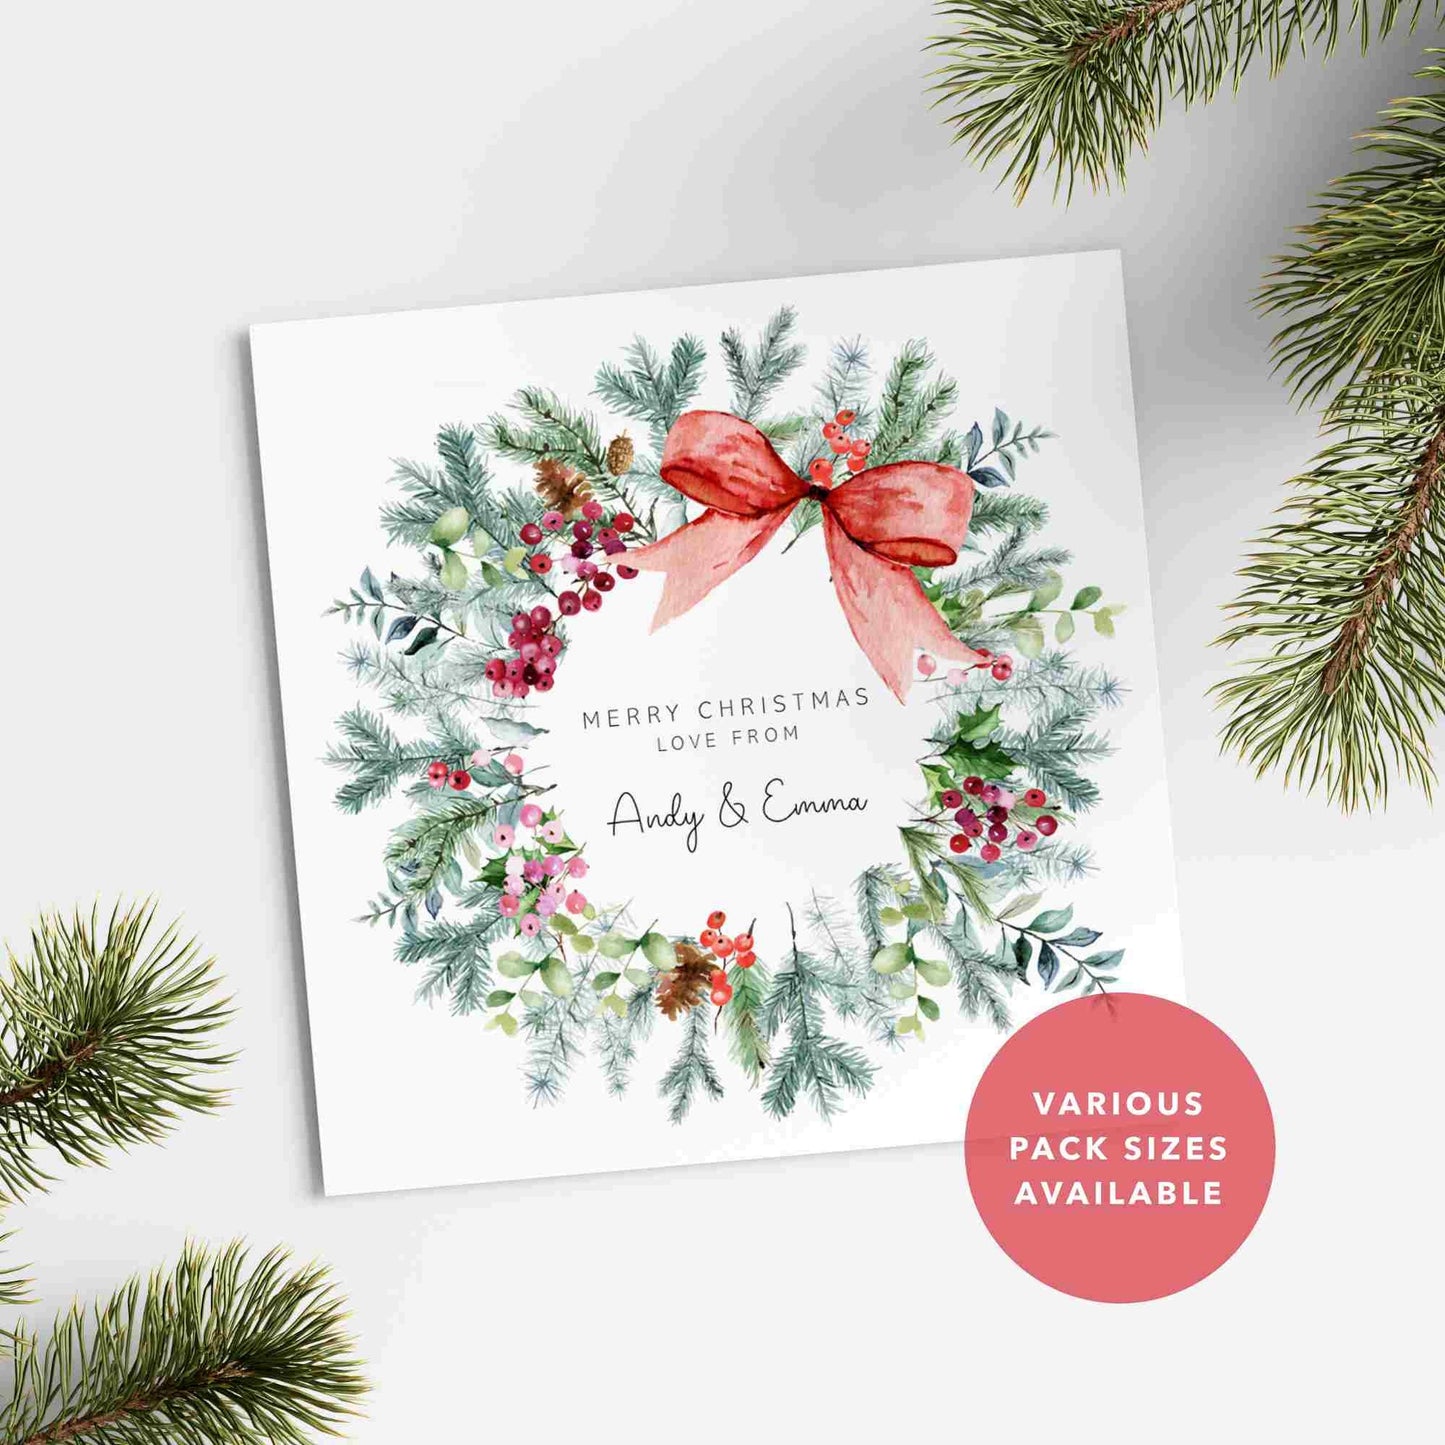 Christmas Wreath Pack of Christmas Cards